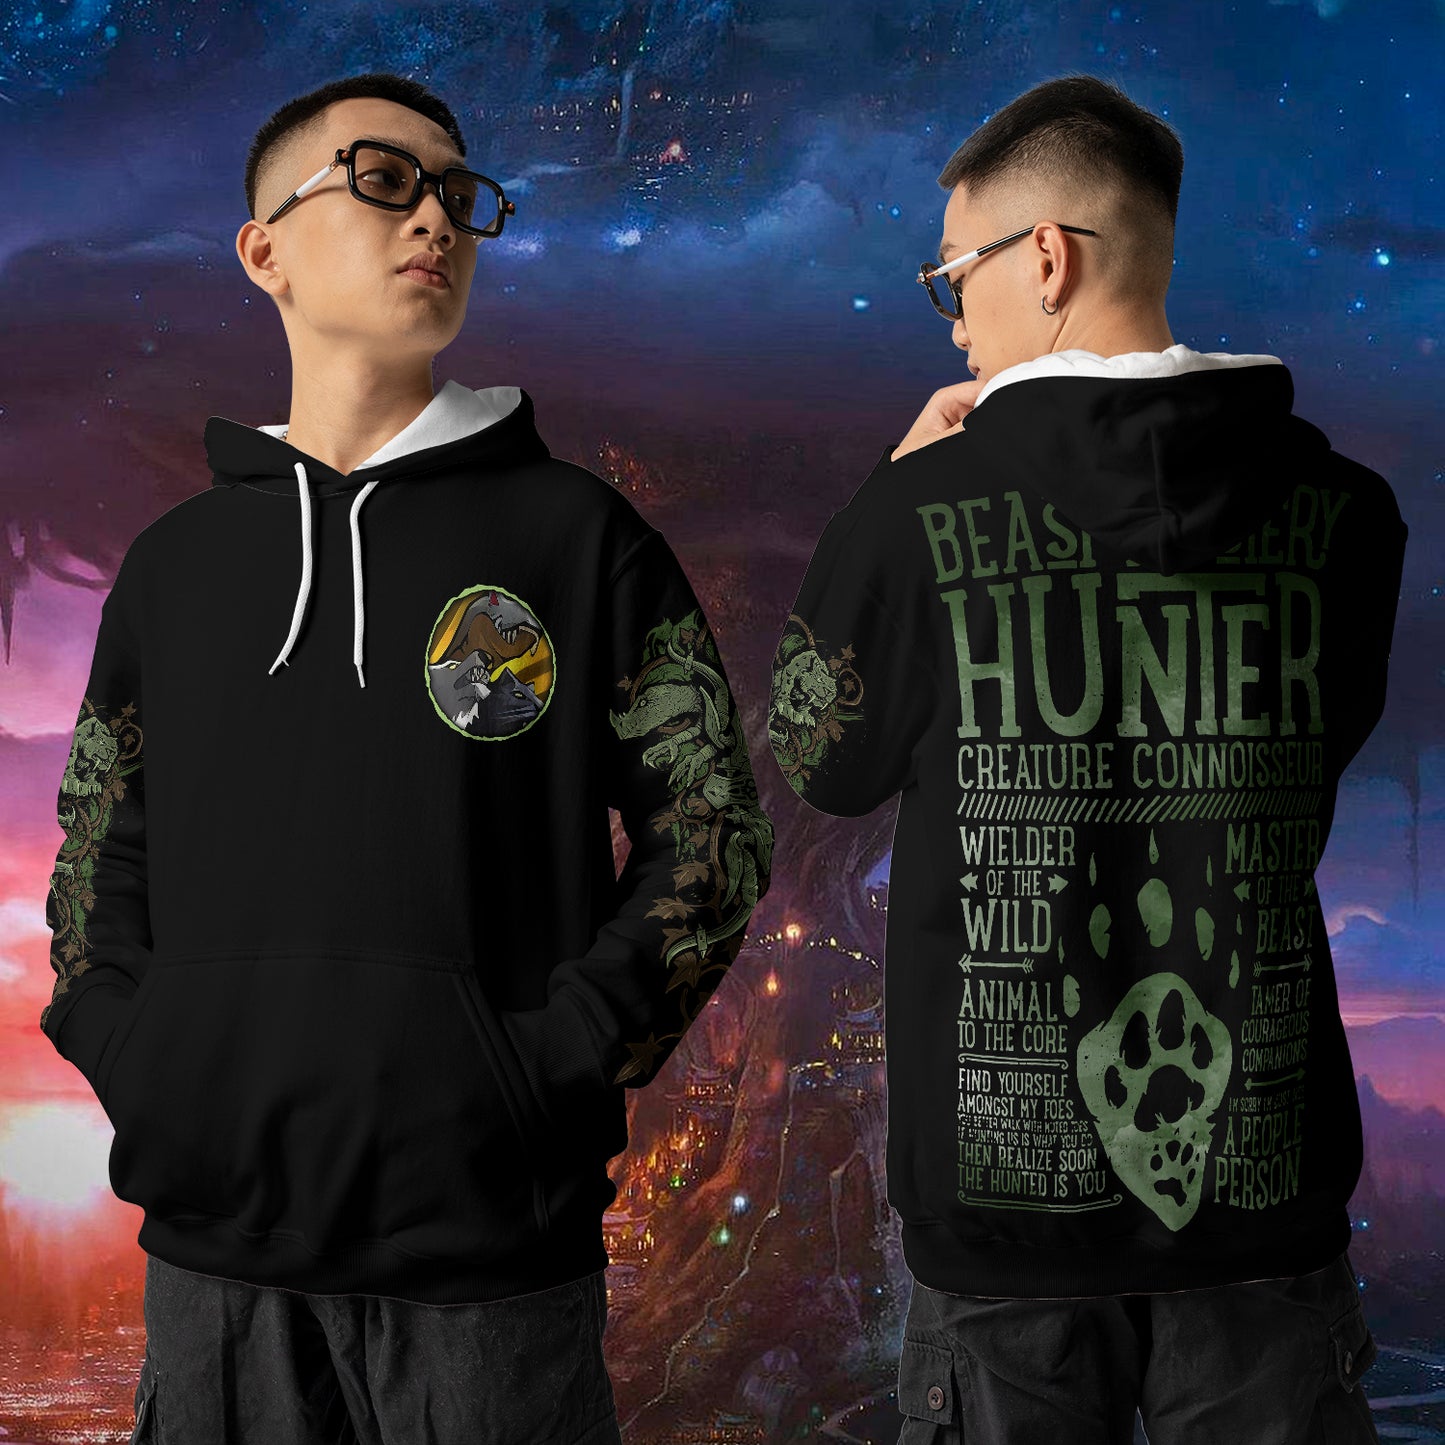 Beast Mastery Hunter - WoW Class Guide V3 - All-over Print Hoodie